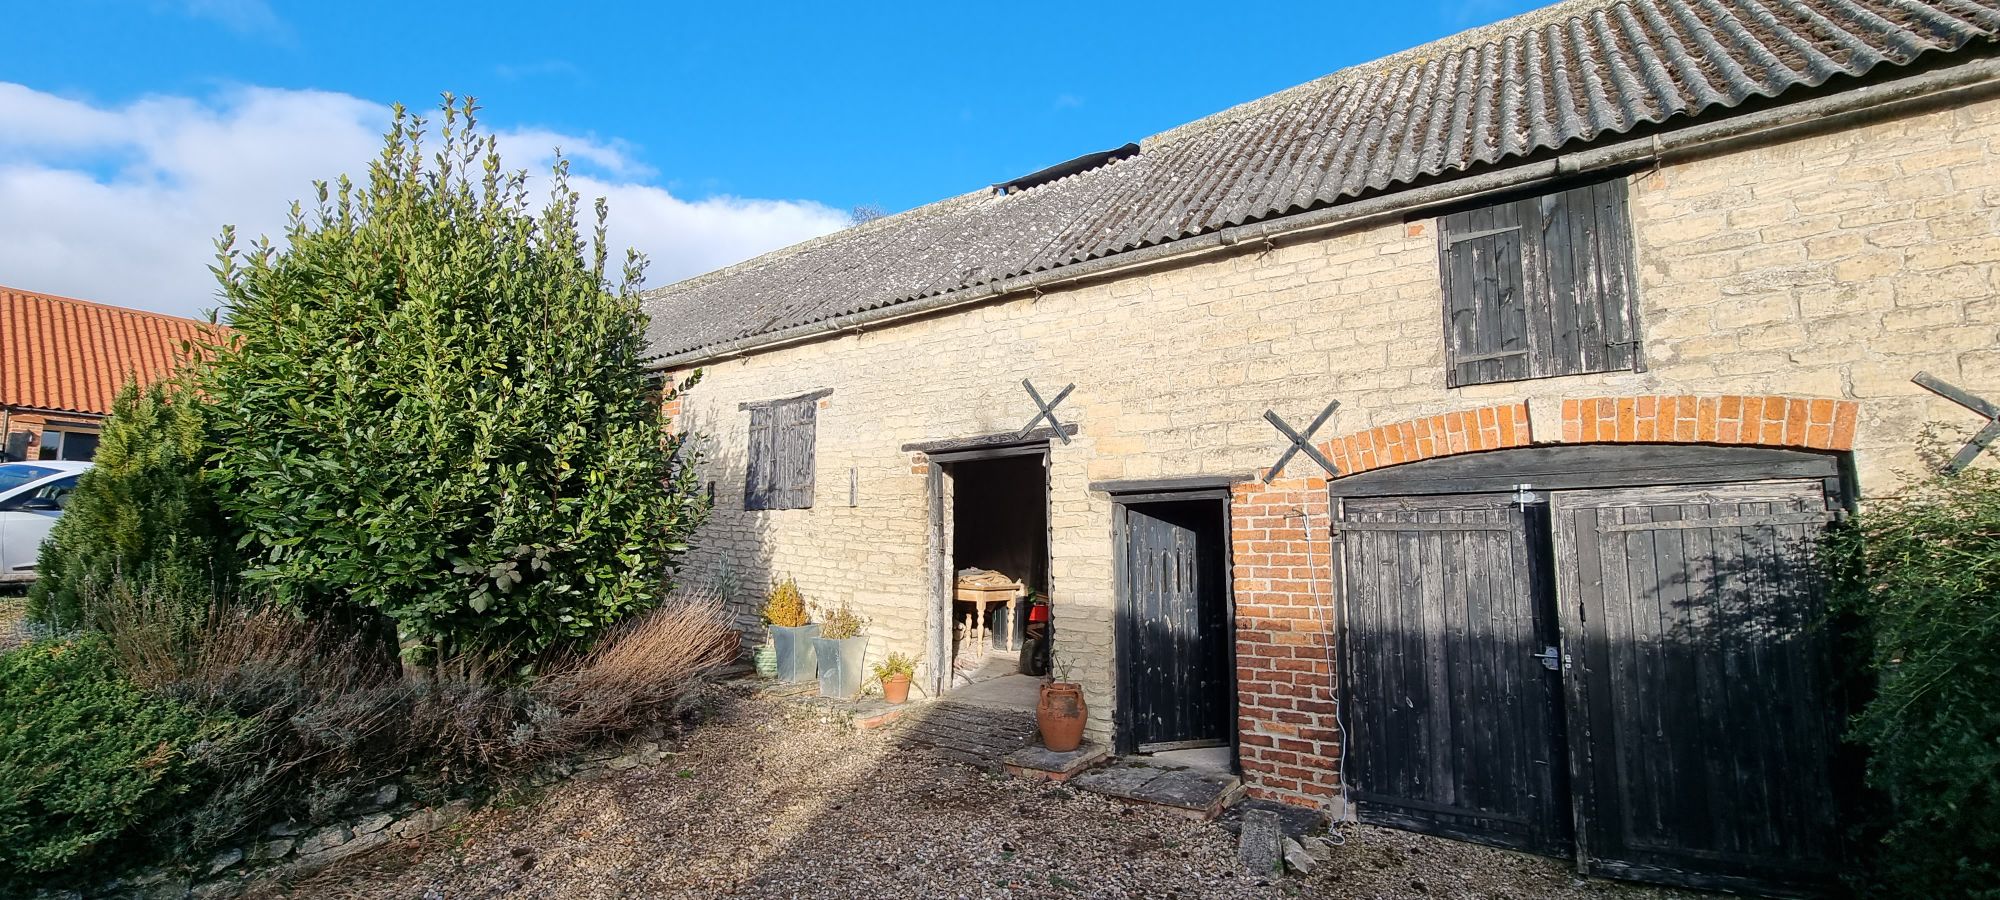 Barn conversions - heritage buildings and Class Q Prior Approval